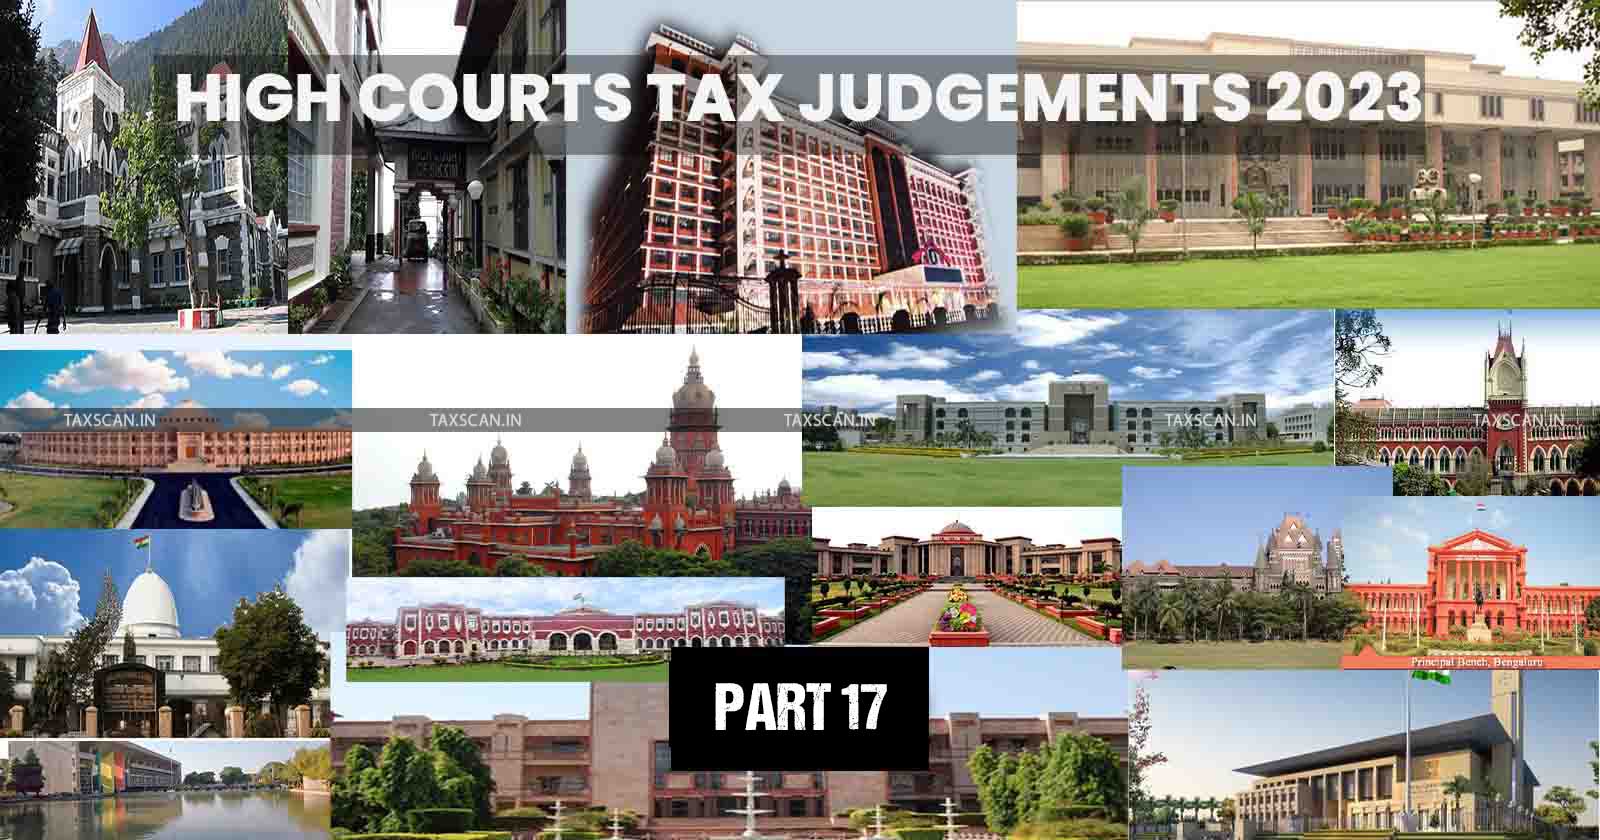 Tax Judgments of High Courts Annual Digest 2023 - High Courts Annual Digest 2023 - Annual Digest 2023 - Tax Judgments of High Courts - high courts - taxscan